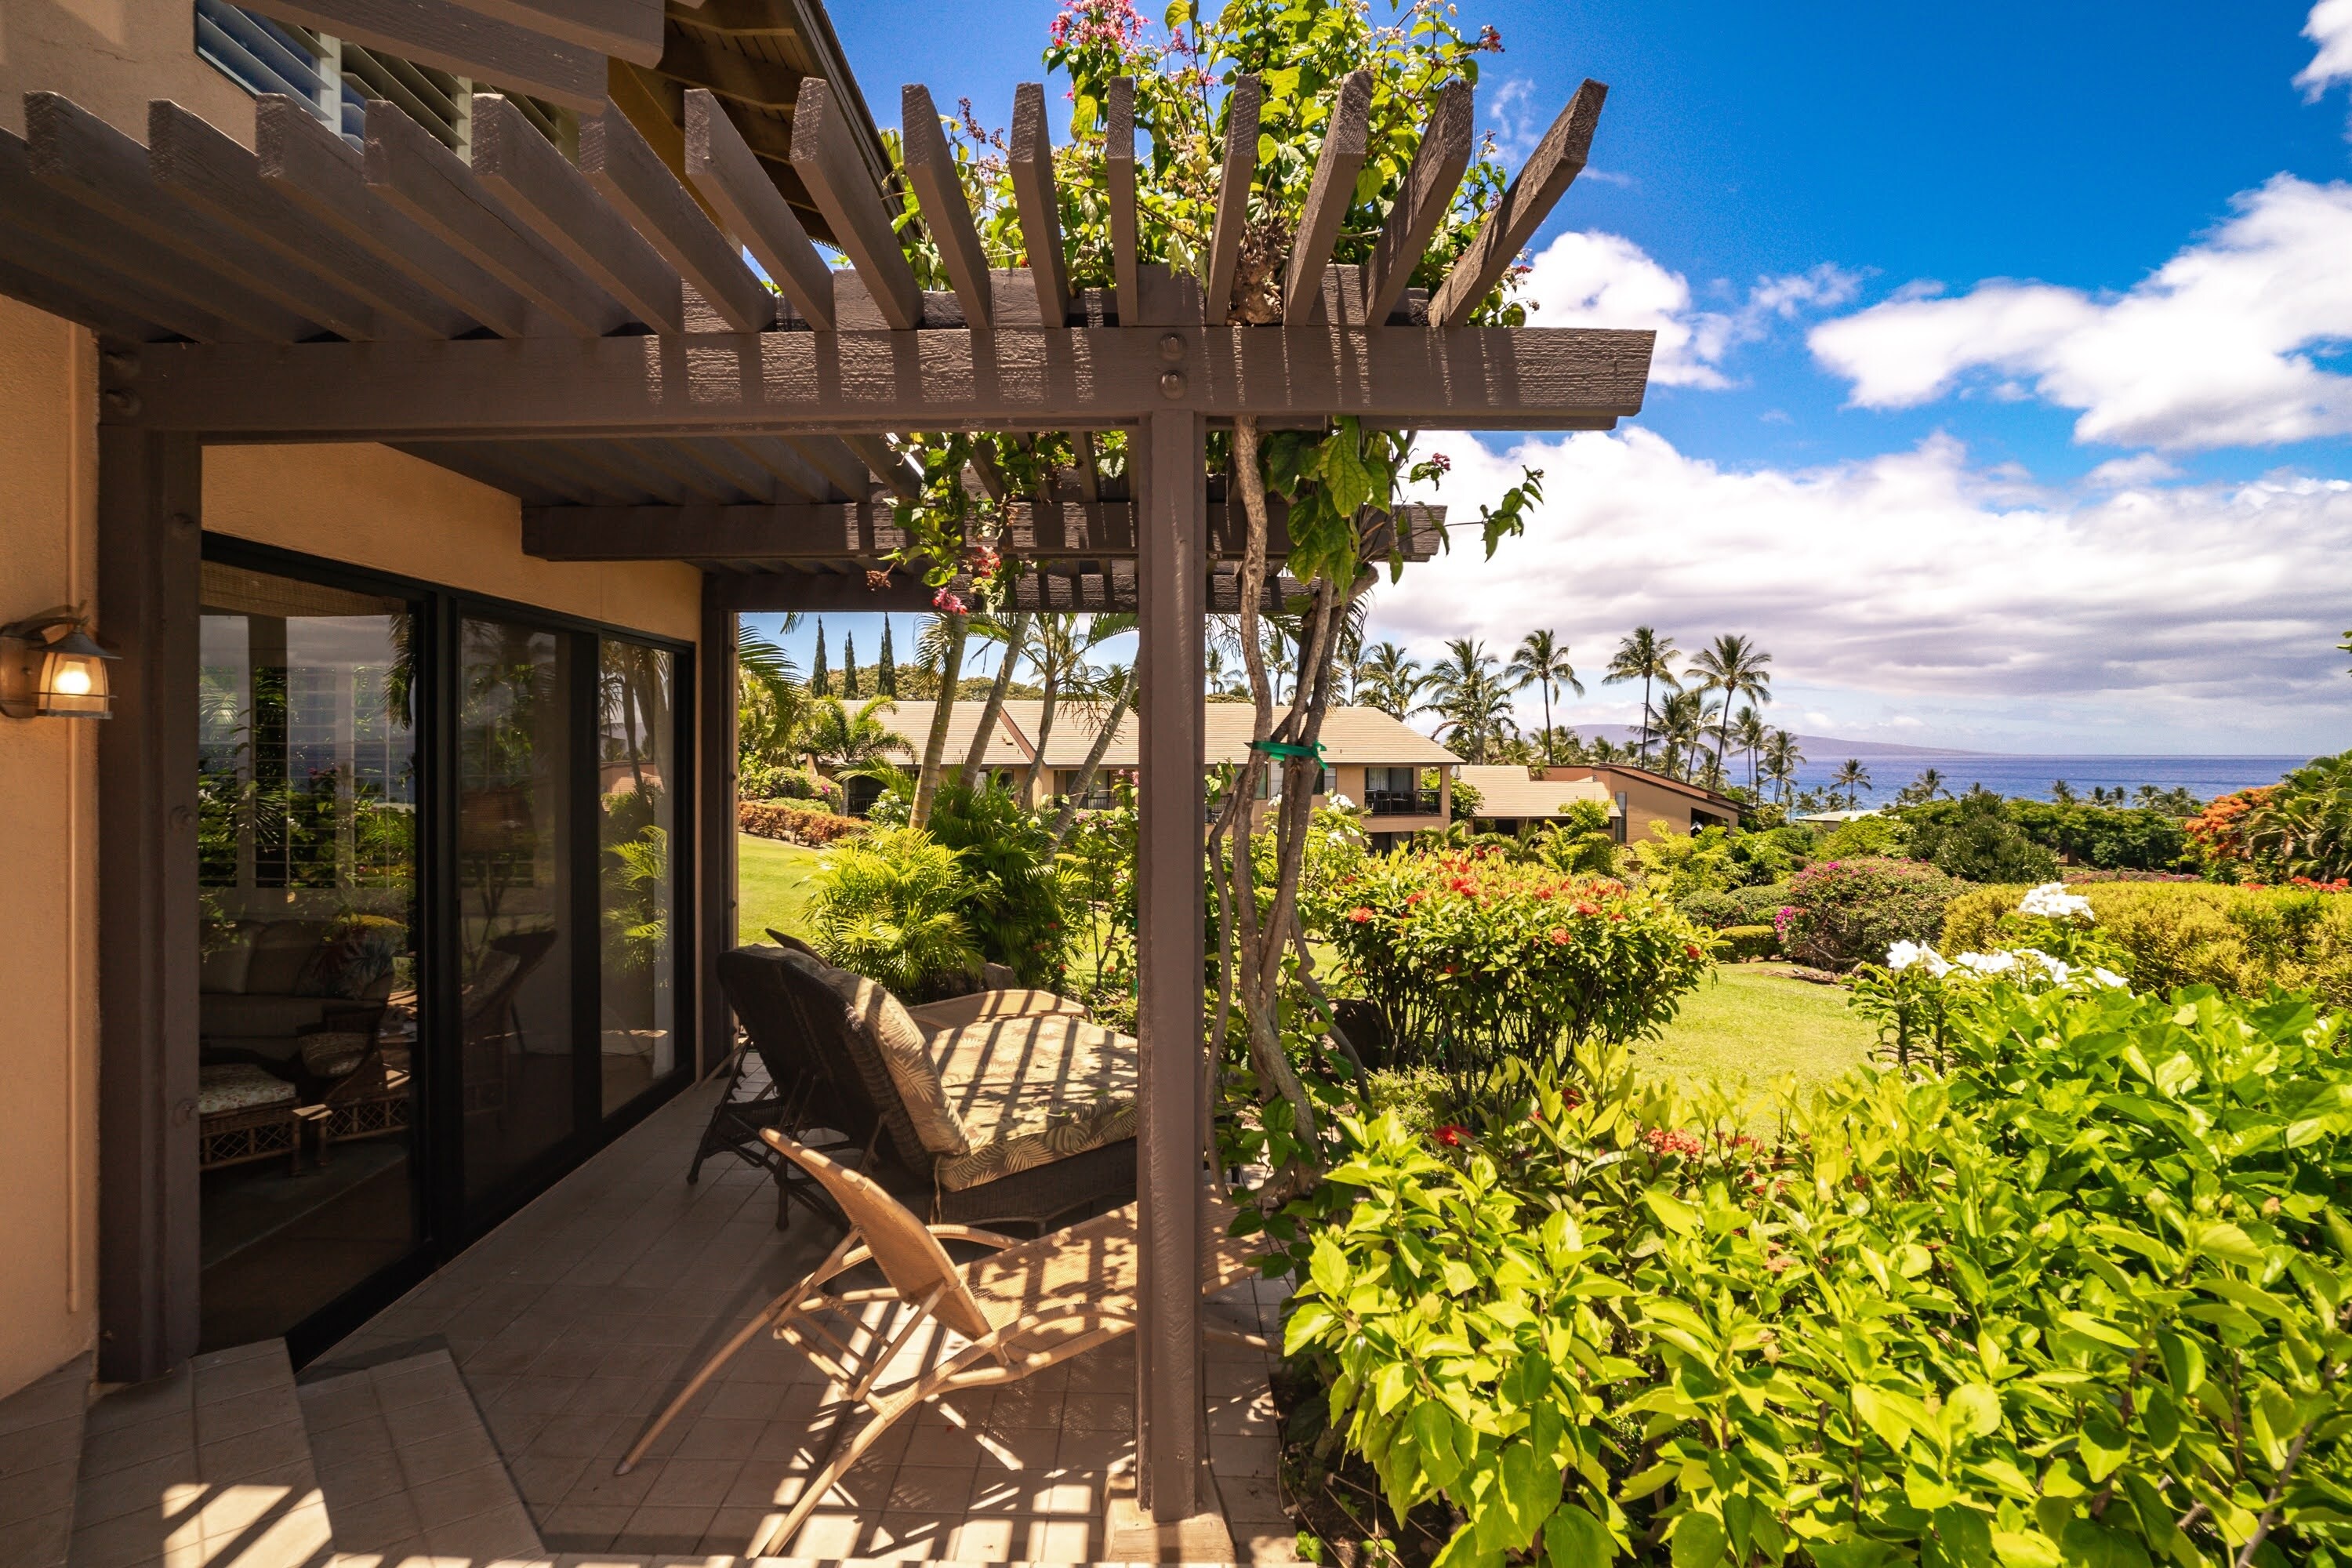 Stunning Ocean View from private lanai.